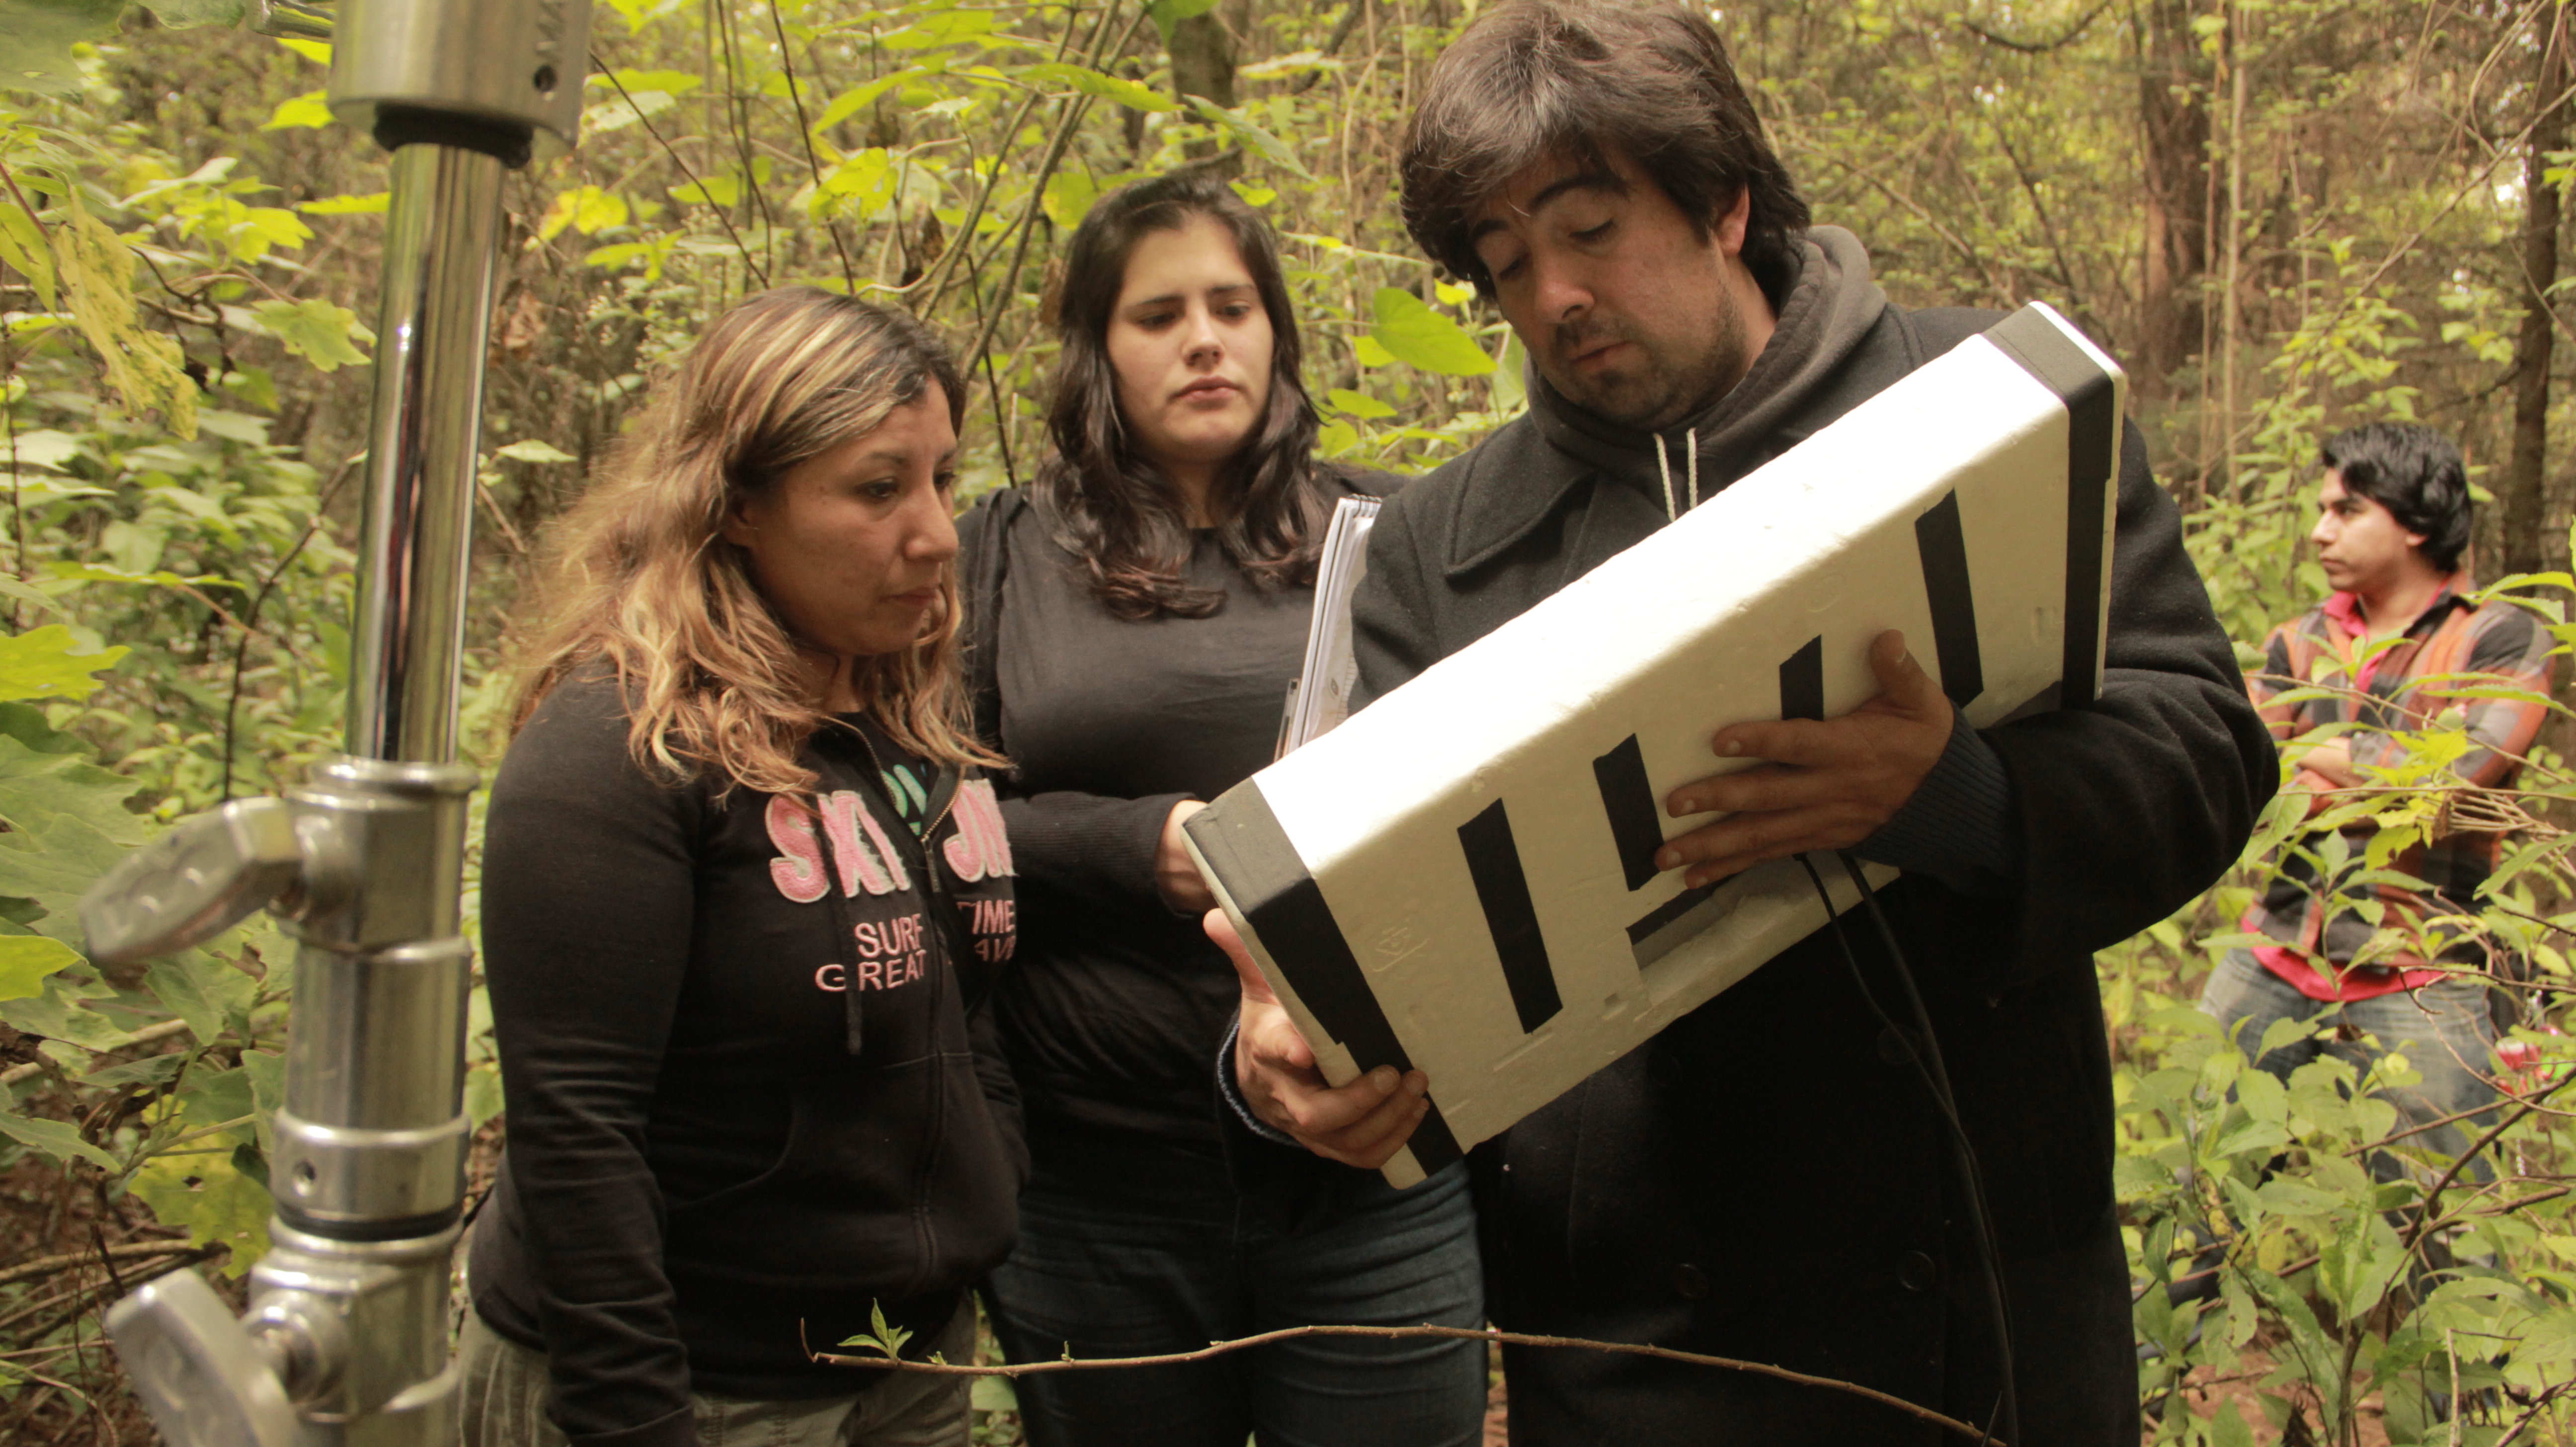 Pedro Araneda gives directions to his crew in Alicia's Dream where he co-wrote, directs and produces.